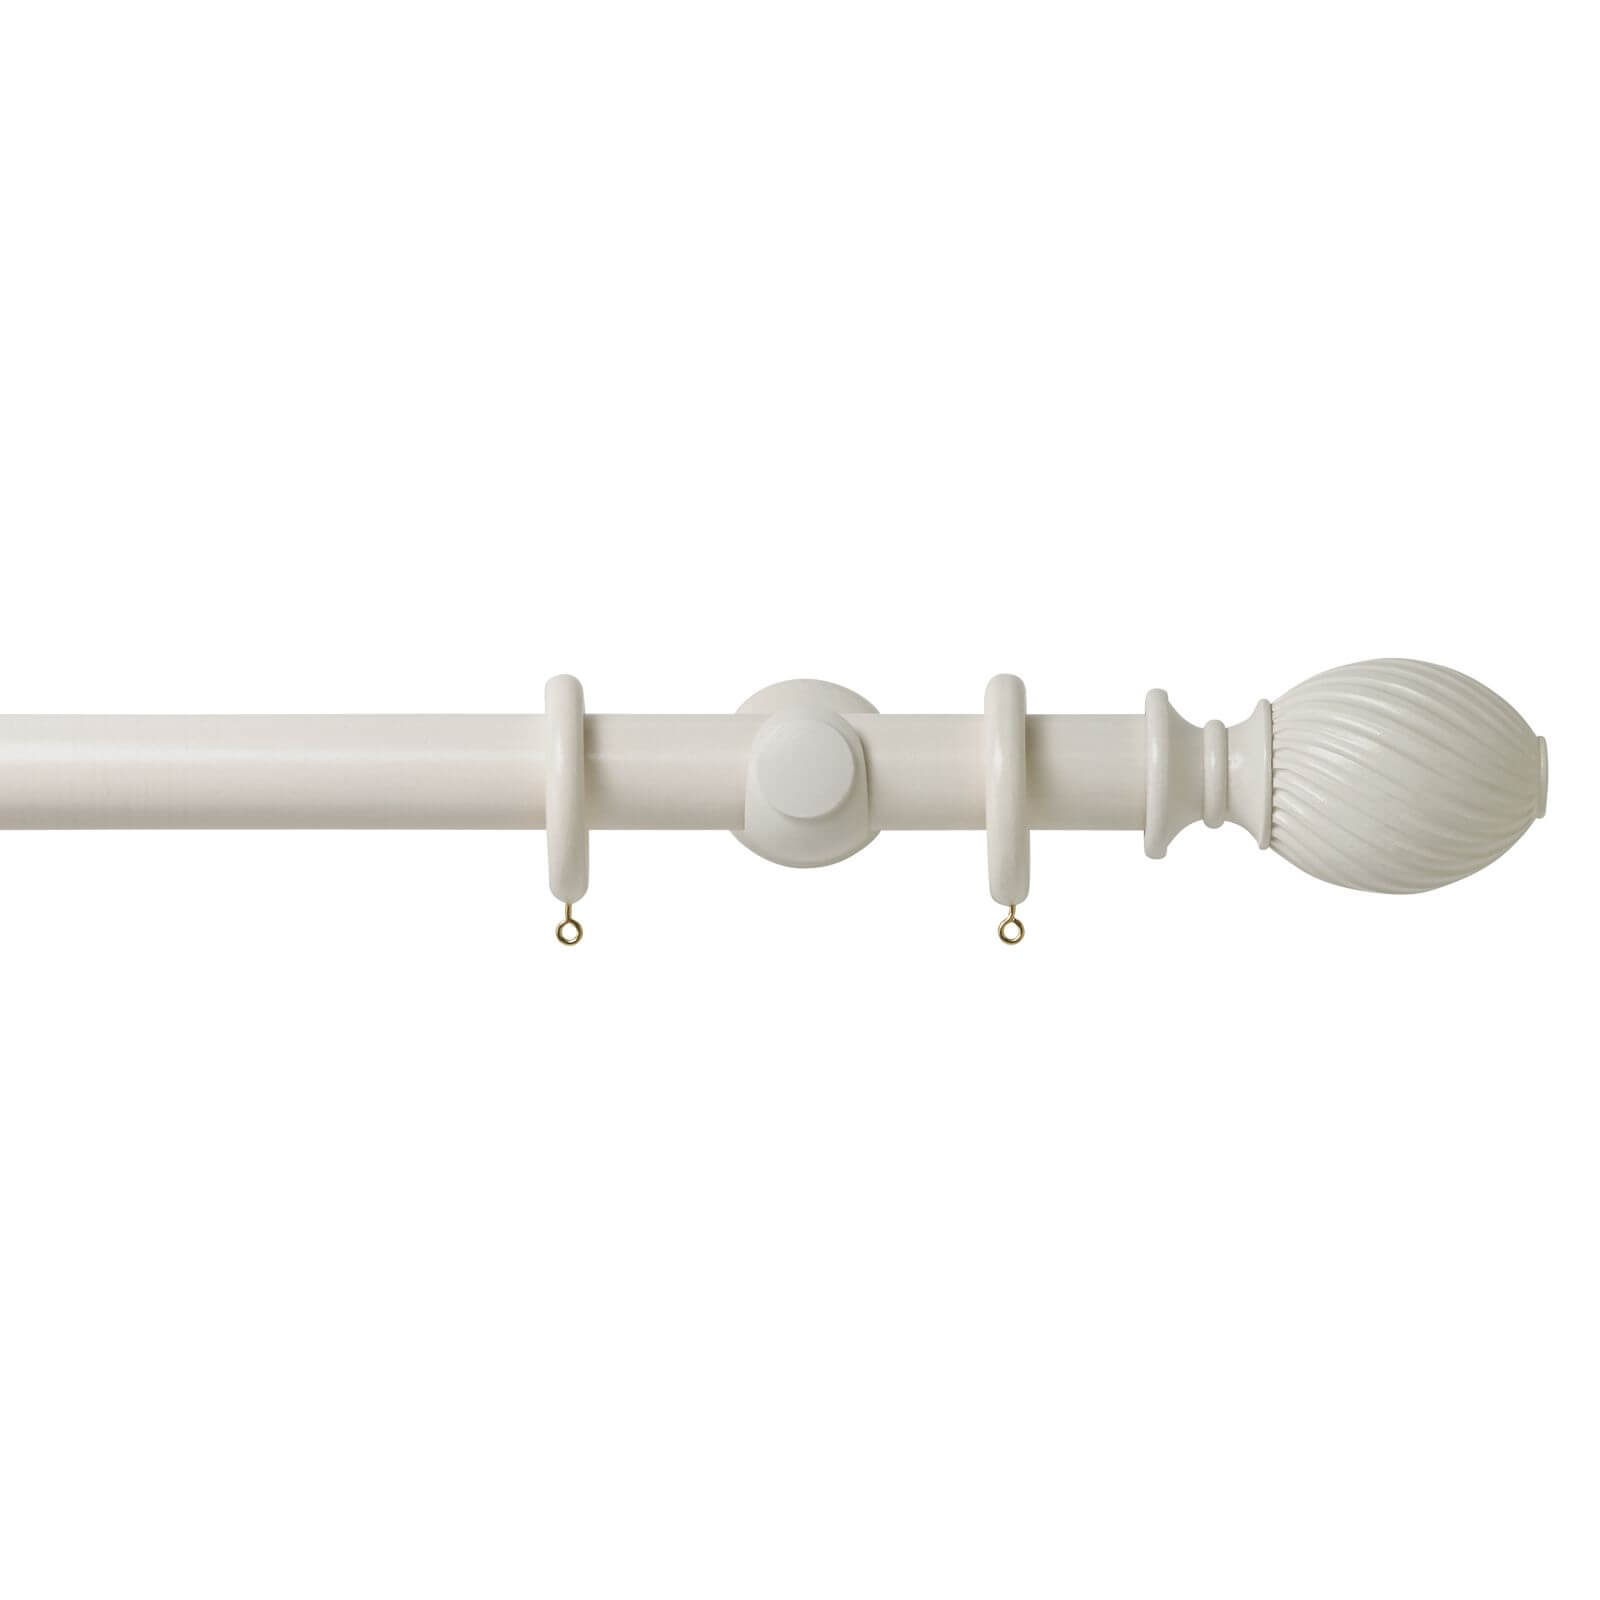 Panacotta 35mm Curtain Pole with Acorn Finial 2.4m